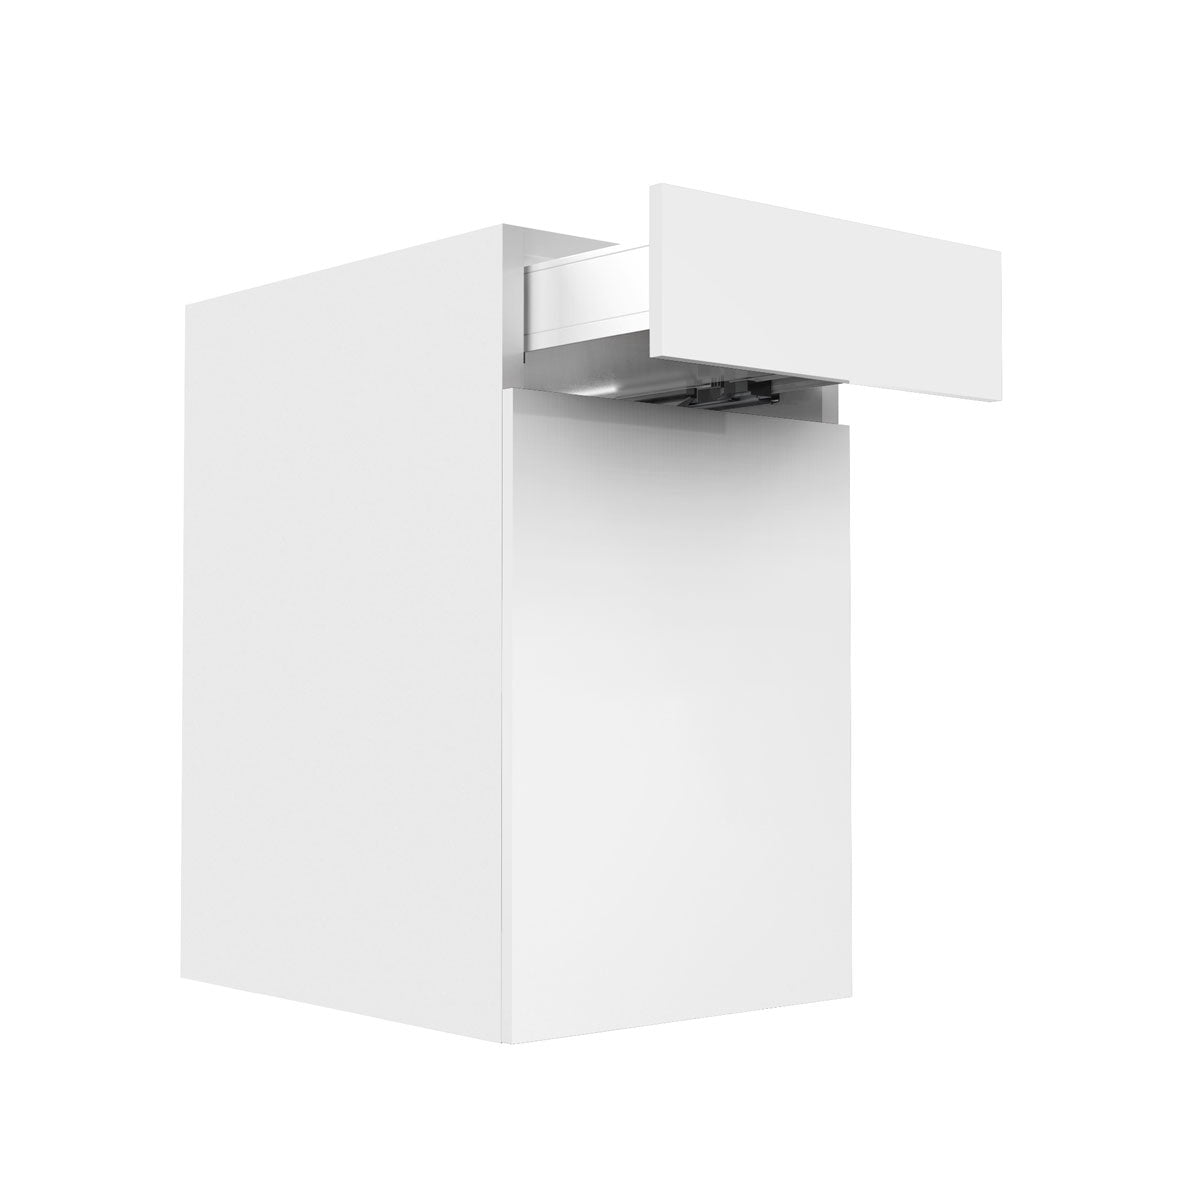 RTA - Glossy White - Single Door Base Cabinets | 18"W x 30"H x 23.8"D